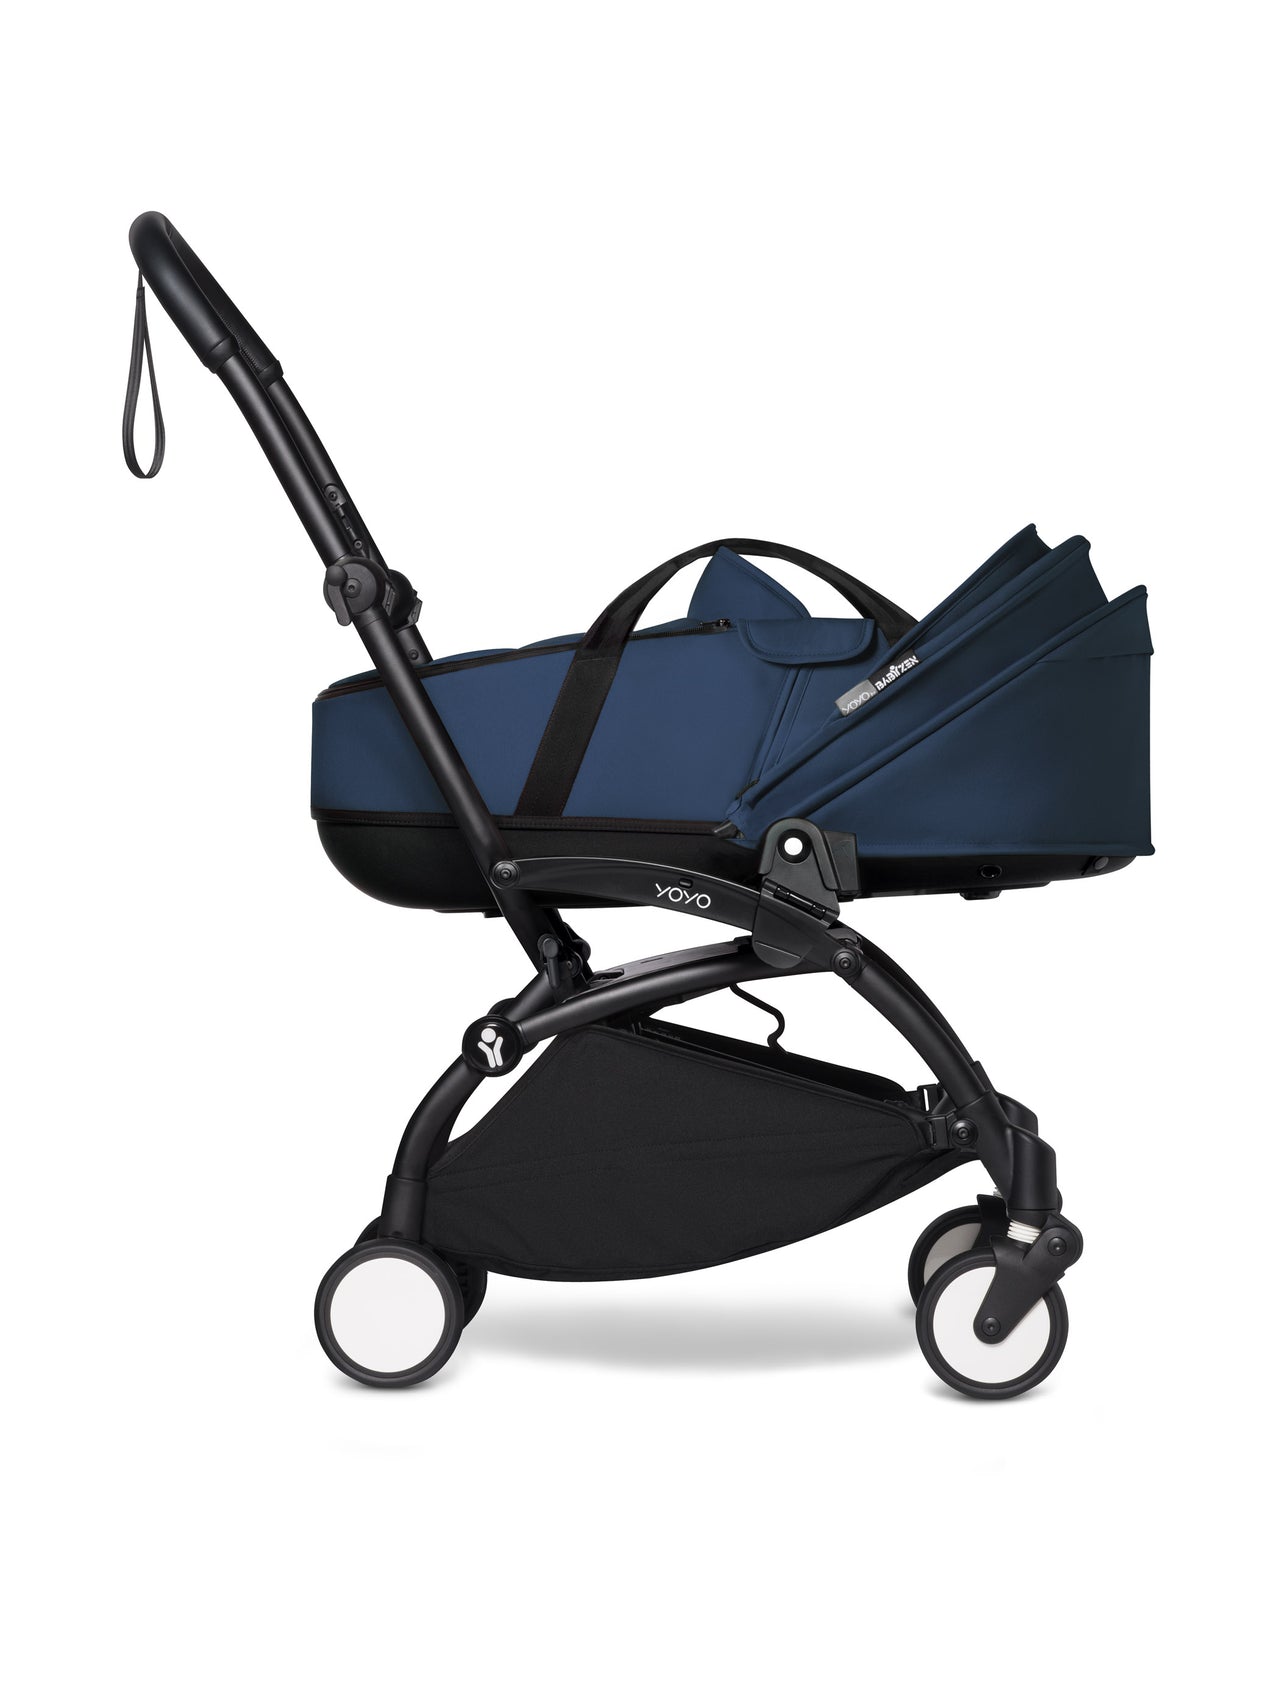 BABYZEN YOYO² (Black Frame) Complete with Bassinet  - Air France with FREE BACKPACK